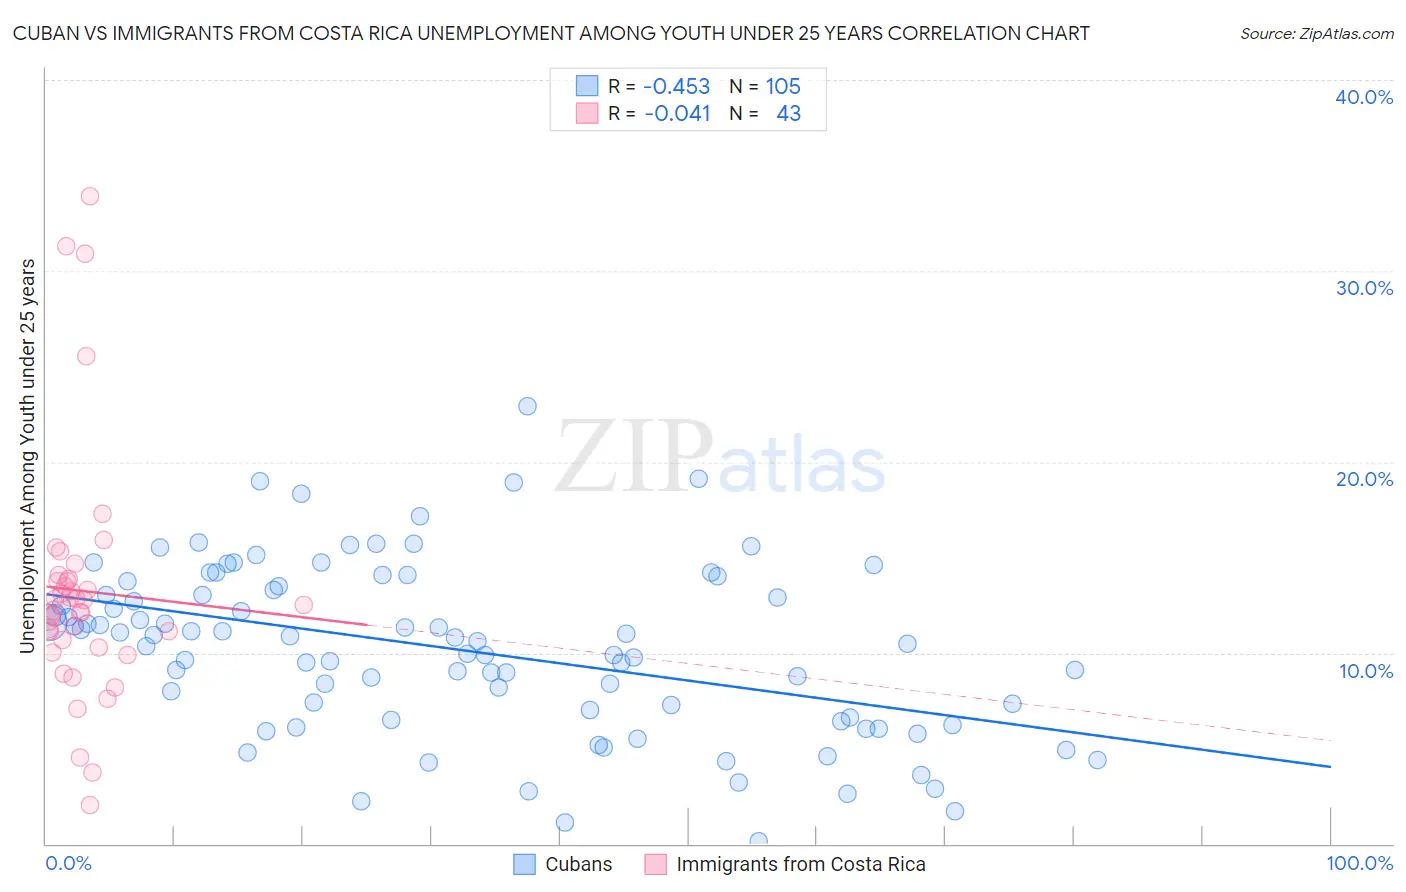 Cuban vs Immigrants from Costa Rica Unemployment Among Youth under 25 years